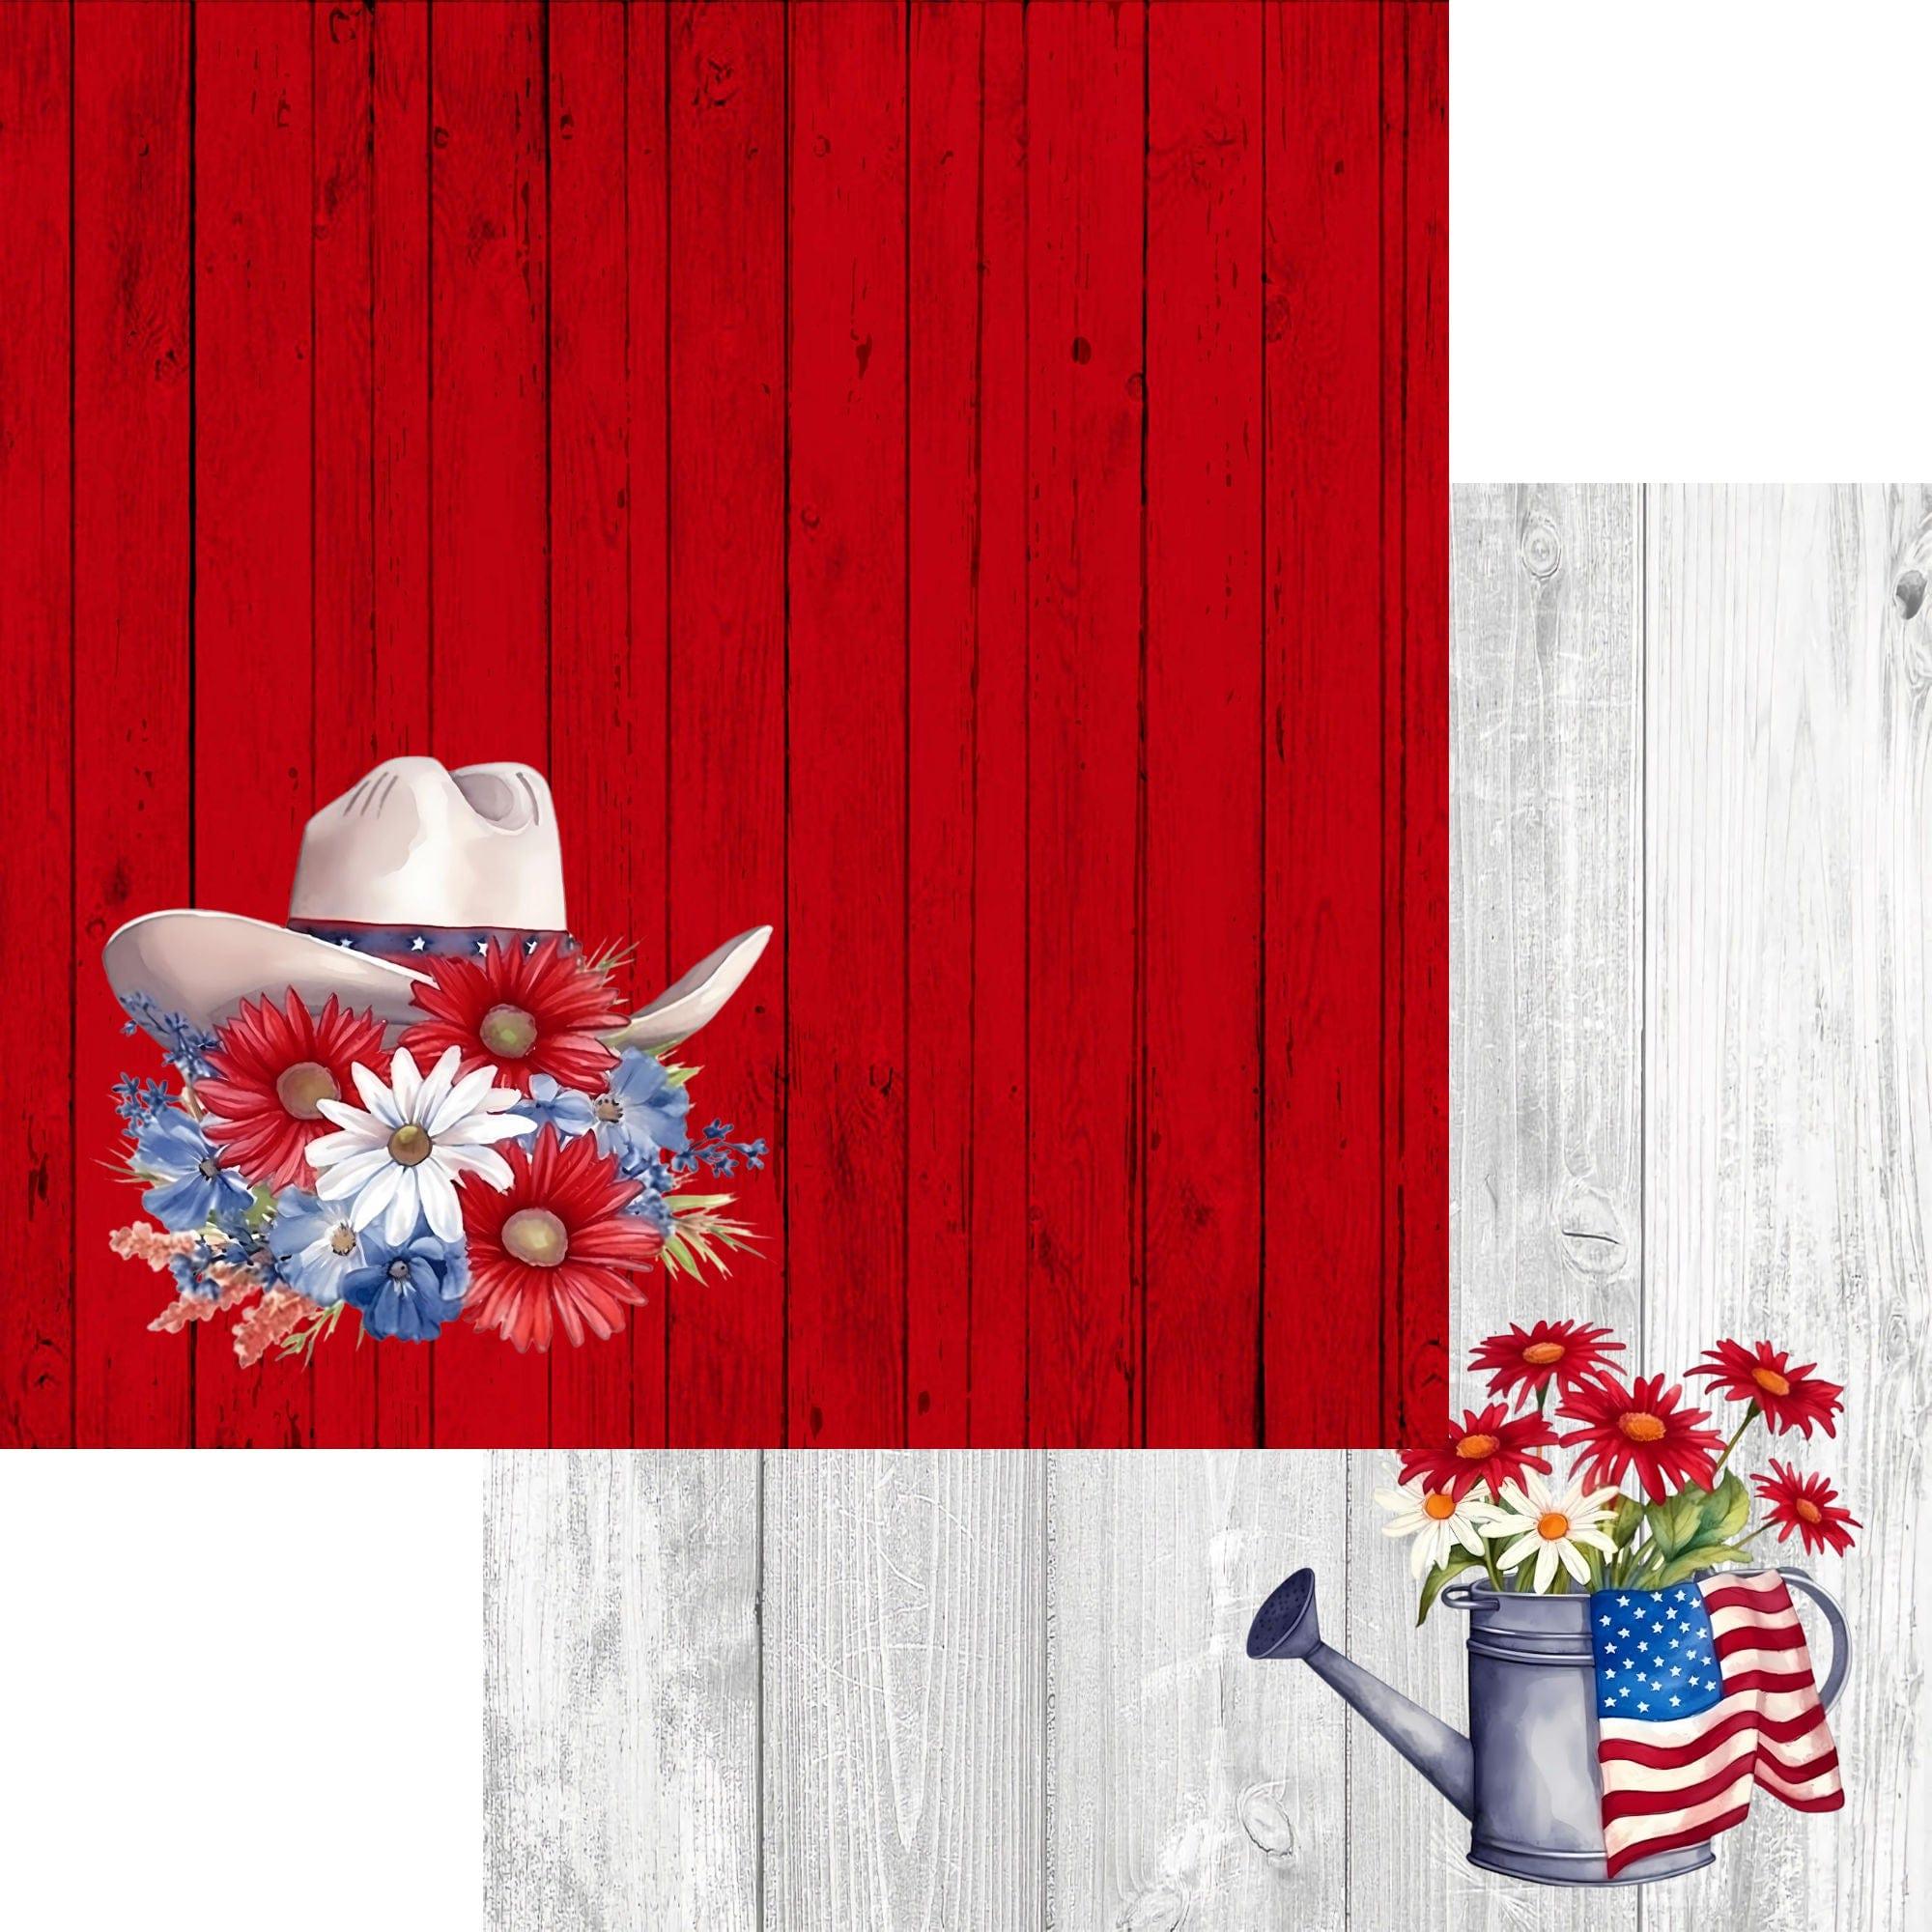 Star Spangled Spurs 12 x 12 Scrapbook Collection Kit by SSC Designs - Scrapbook Supply Companies